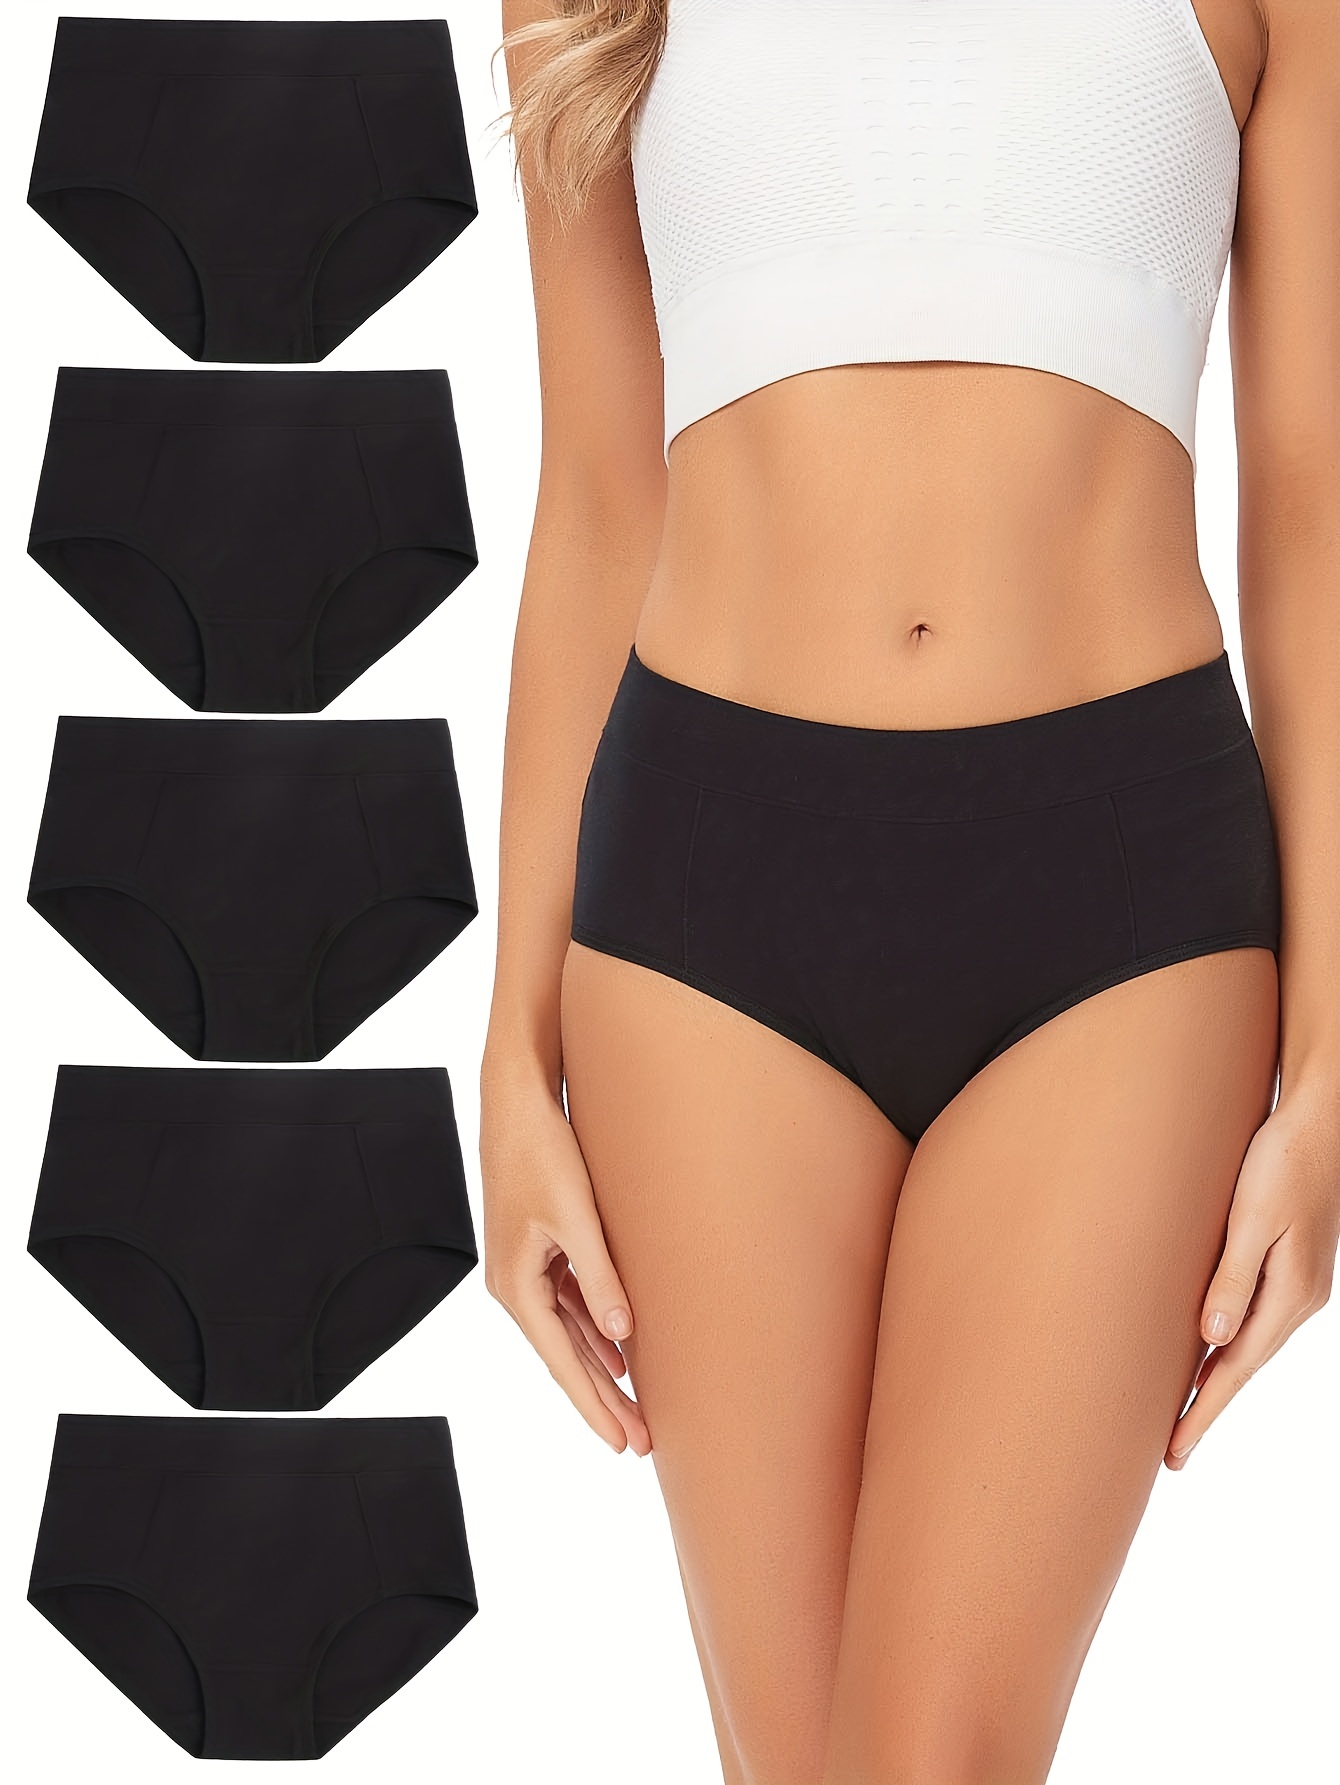 5pcs Women's Soft & Breathable High Waisted Full Coverage